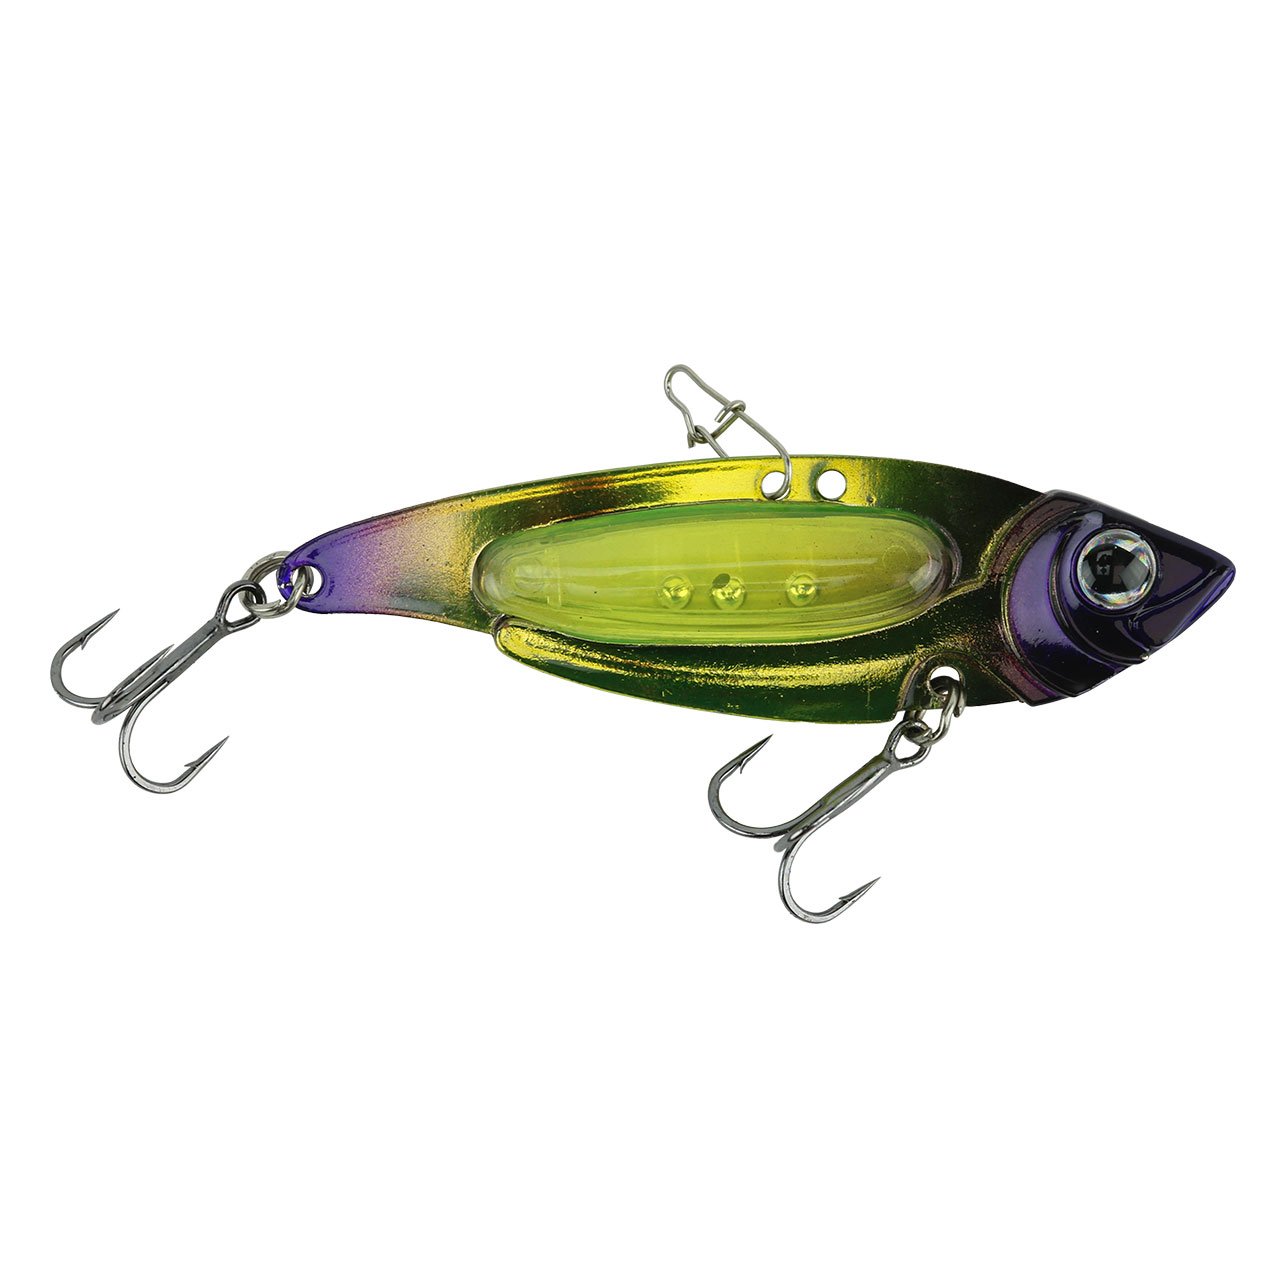 Walleye Nation Creation Rip N Rattle - Gold Digger - 3